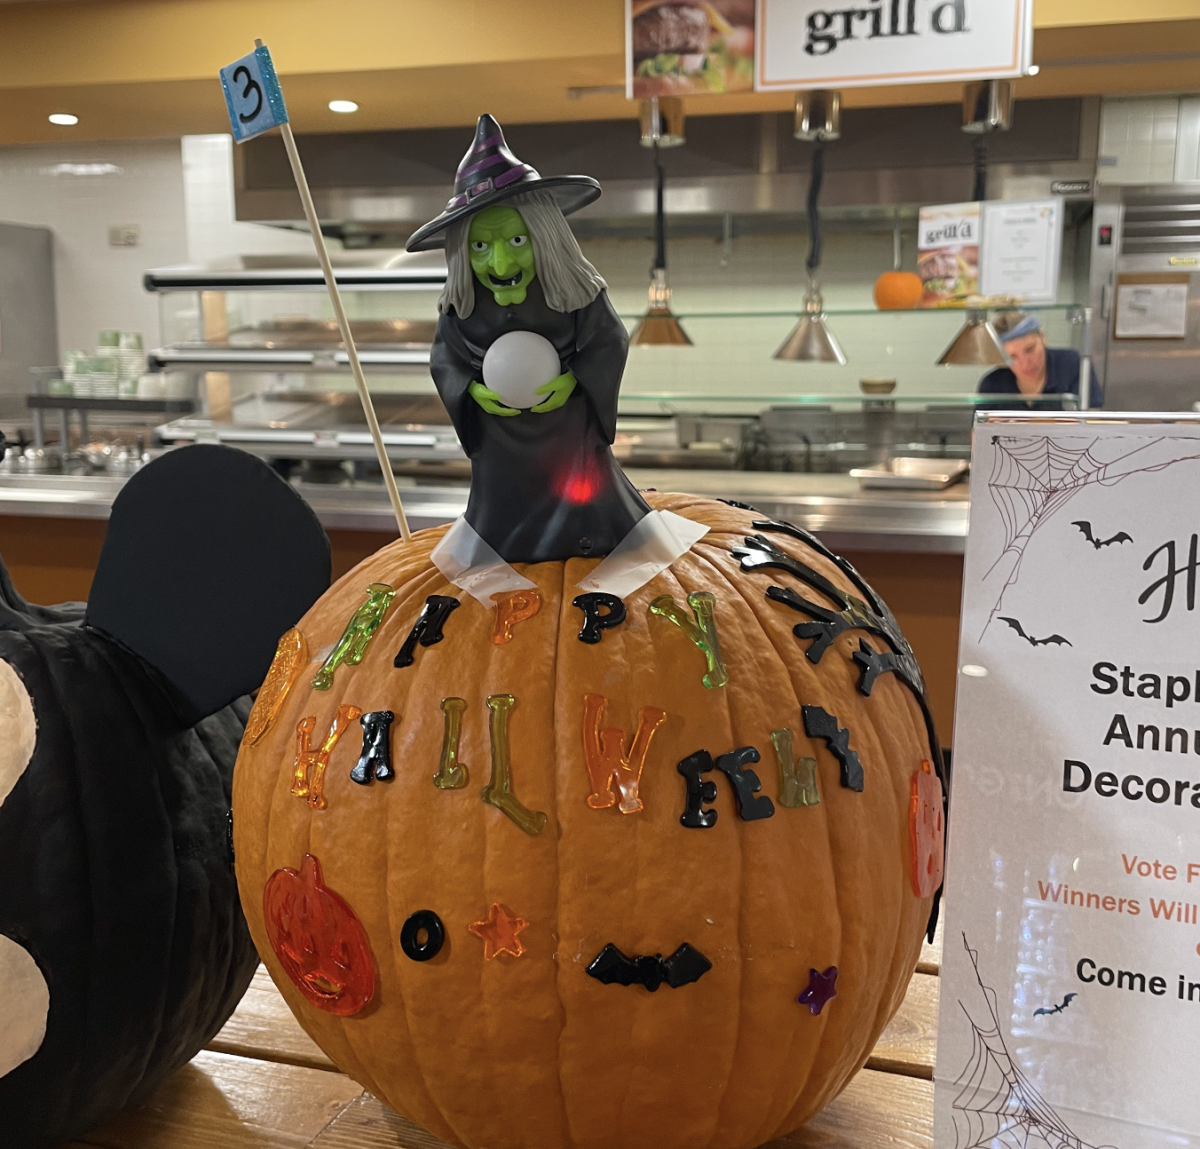 This third pumpkin was decorated by cafeteria server, Anna. The pumpkin was embellished with Gel clings that compliment the holiday spirit, letters that spell out Happy Halloween, and an interactive witch that cackles when the red dot appears.
